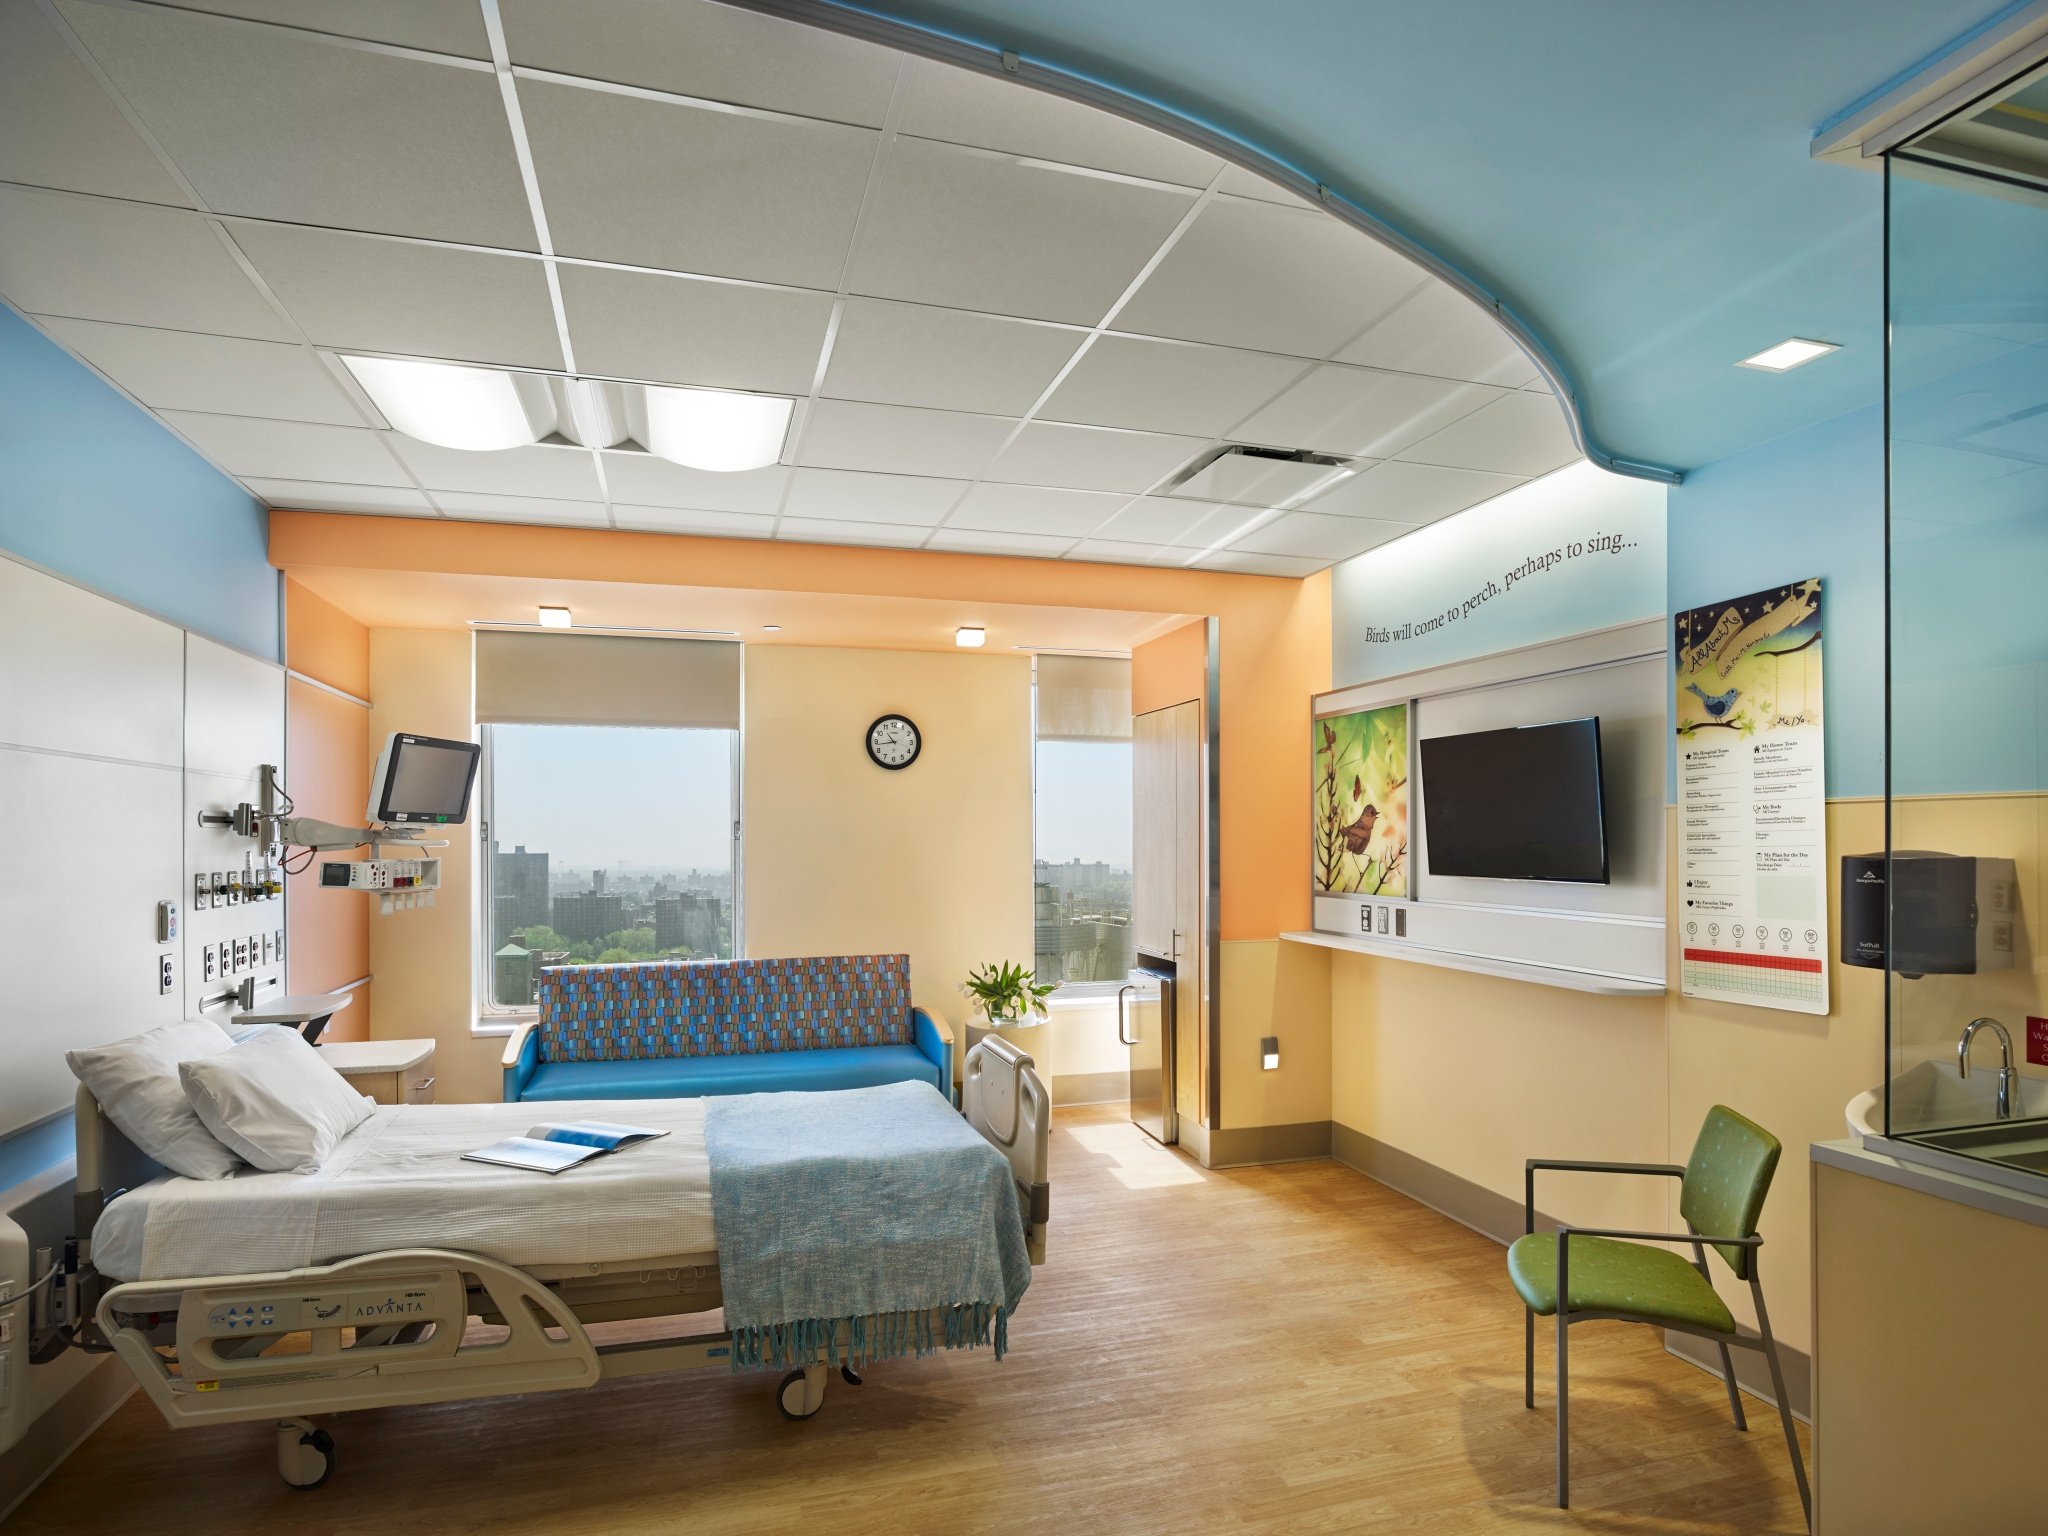 CHoNY PICU Patient Room with Environmental Colors